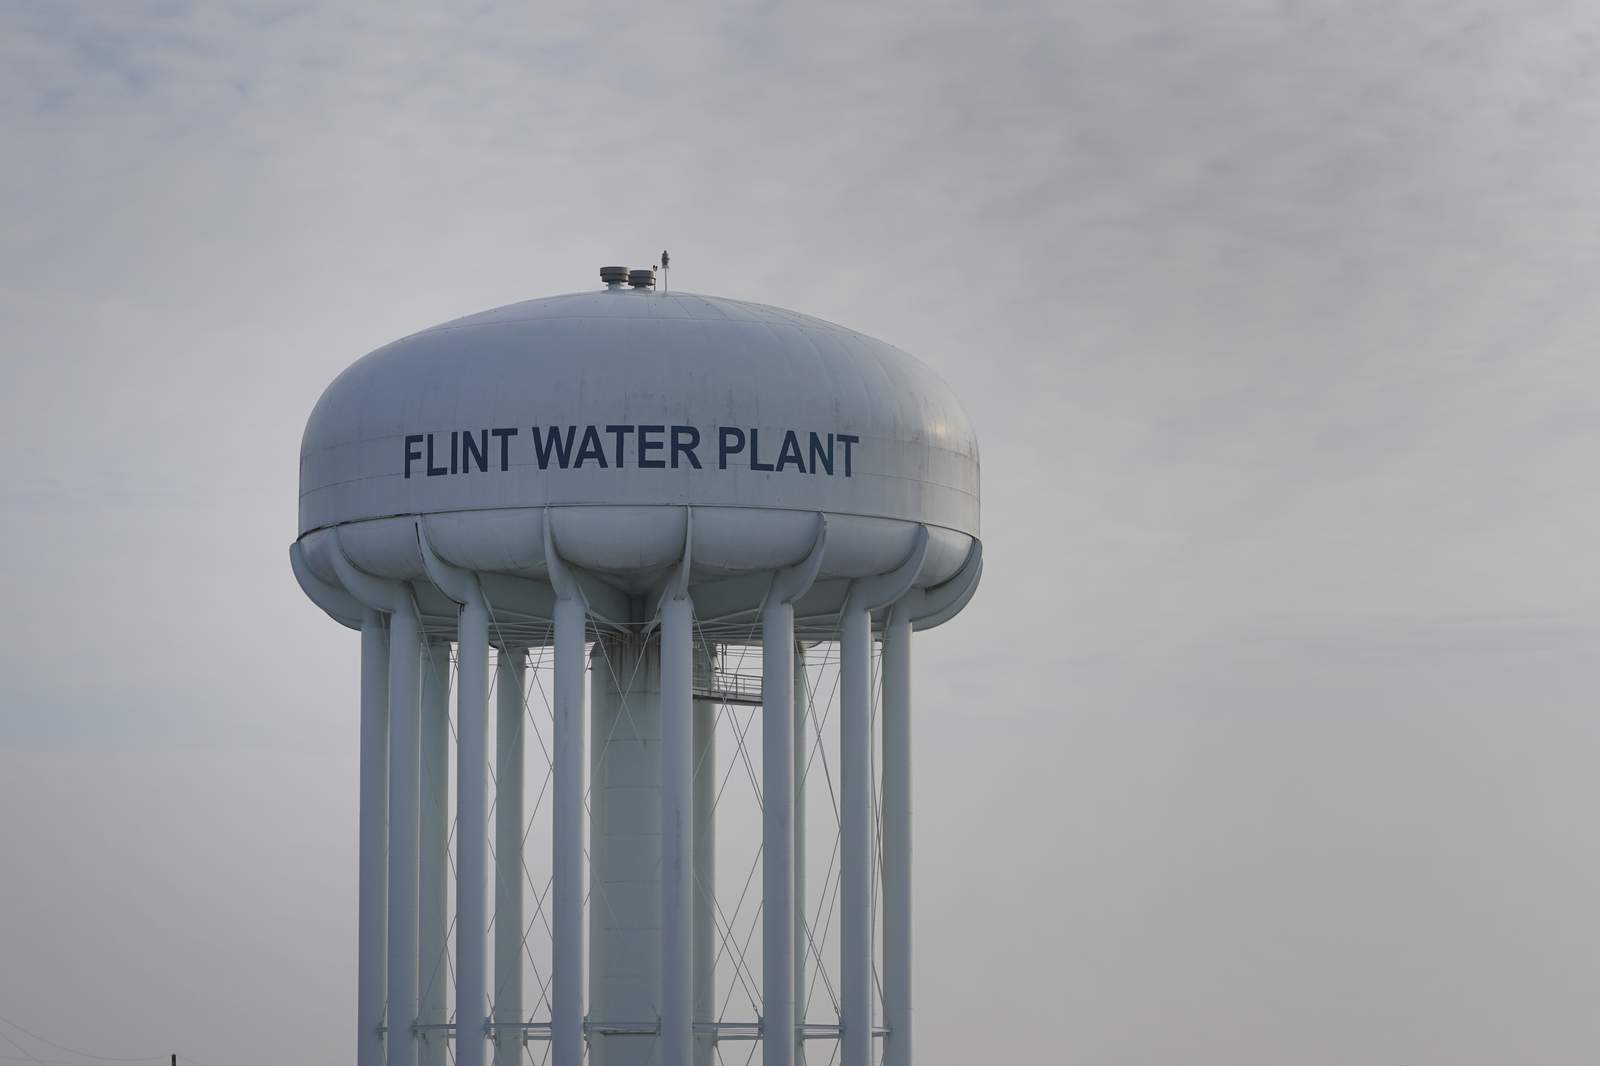 Flint water crisis prosecution team to discuss findings from investigation